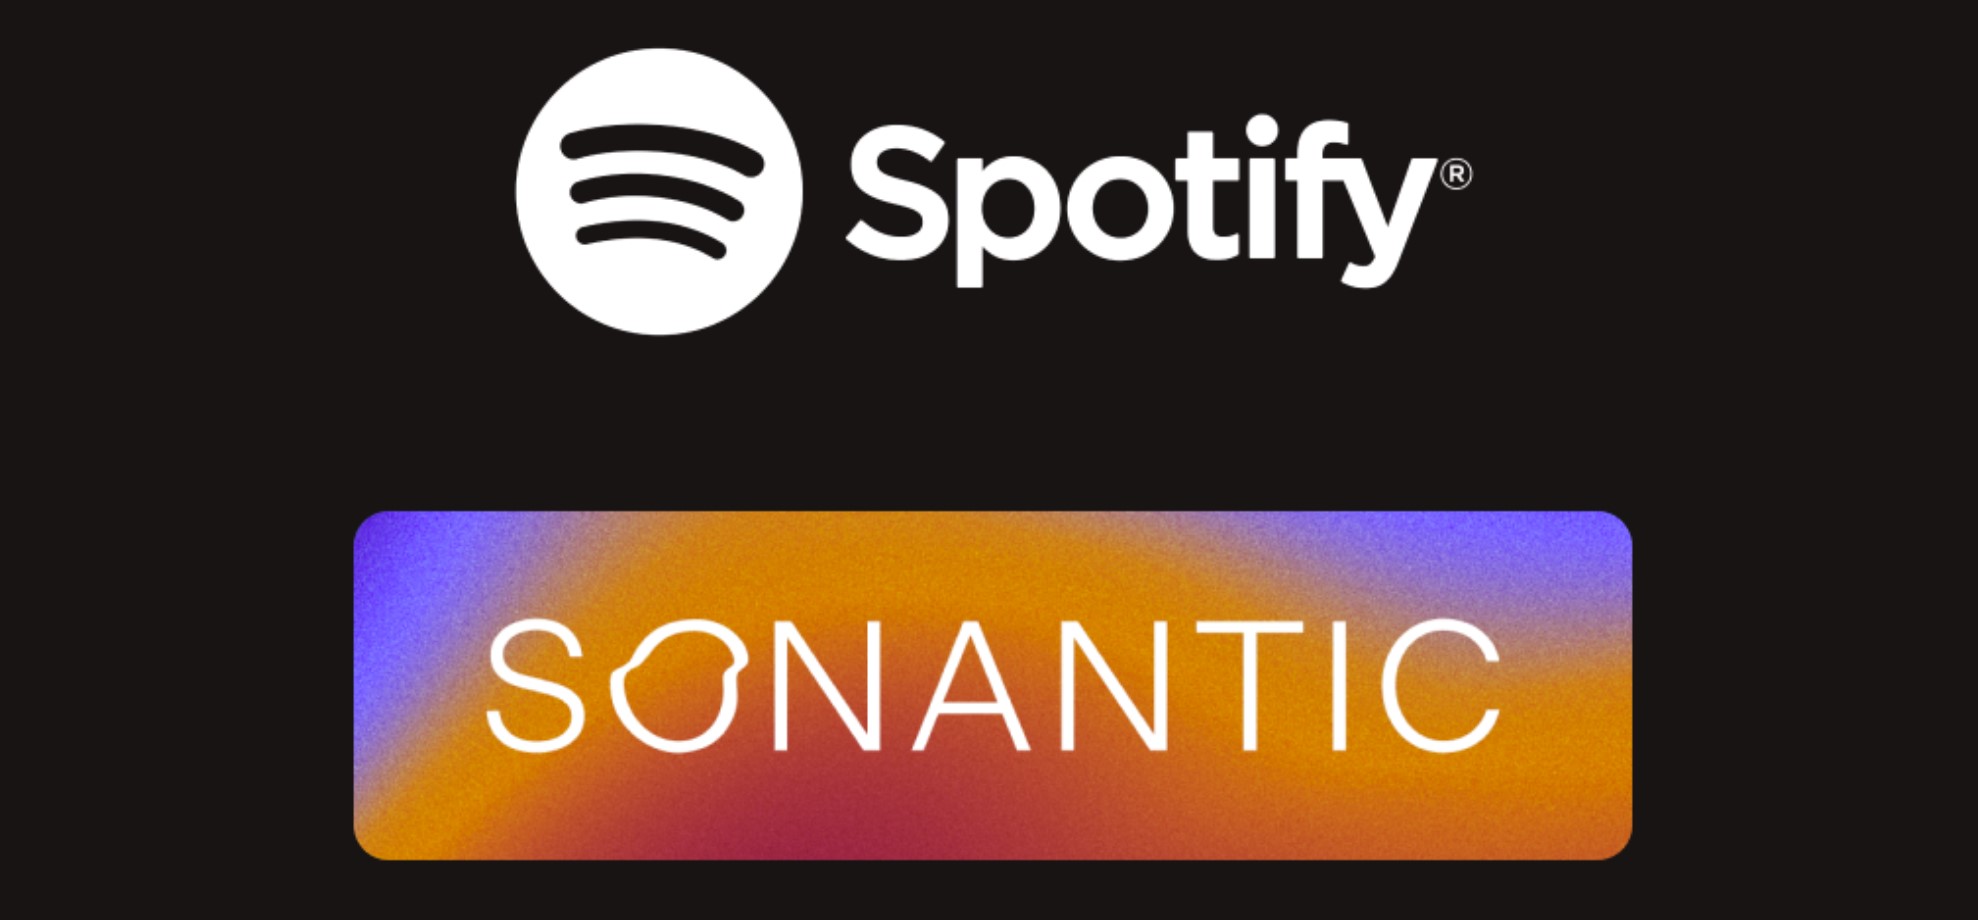 Spotify will acquire Sonantic, an AI voice platform